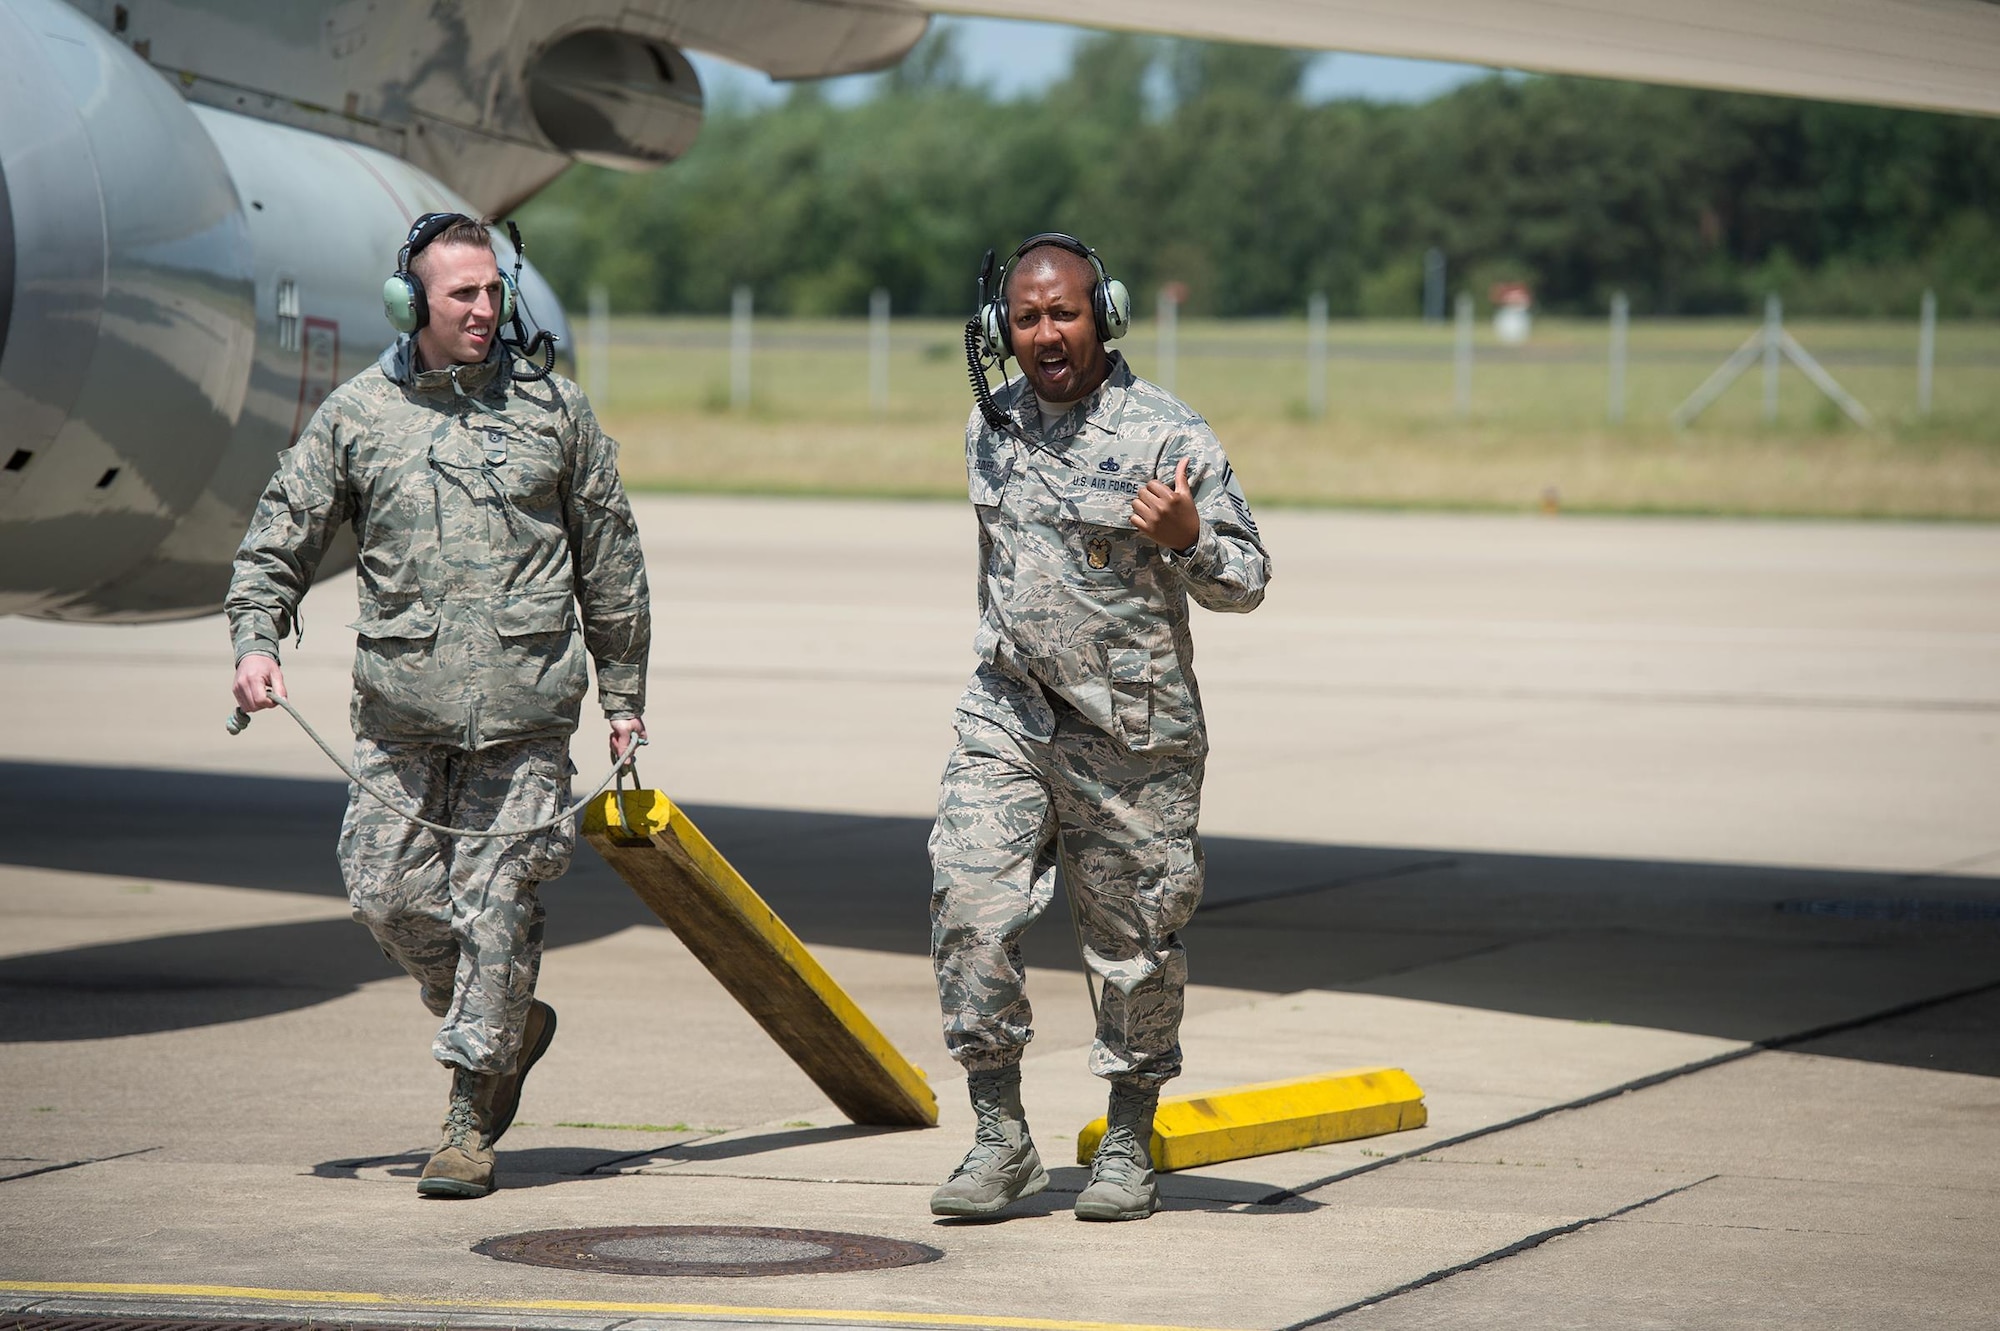 Tech. Sgt. Jordan Wright and Senior Master Sgt. Alphonzo Glover, both maintenance Reservists from the 513th Air Control Group, pull chocks from an E-3 Sentry Airborne Warning and Control System aircraft on June 7, 2017, at NATO Air Base Geilenkirchen, Germany, prior to a mission in support of BALTOPS 2017. Both Airmen are a part of the nearly 100 Reservists supporting the BALTOPS 2017 exercise, which involves 50 ships and submarines and 40 aircraft from 14 member nations. (U.S. Air Force photo/2nd Lt. Caleb Wanzer)